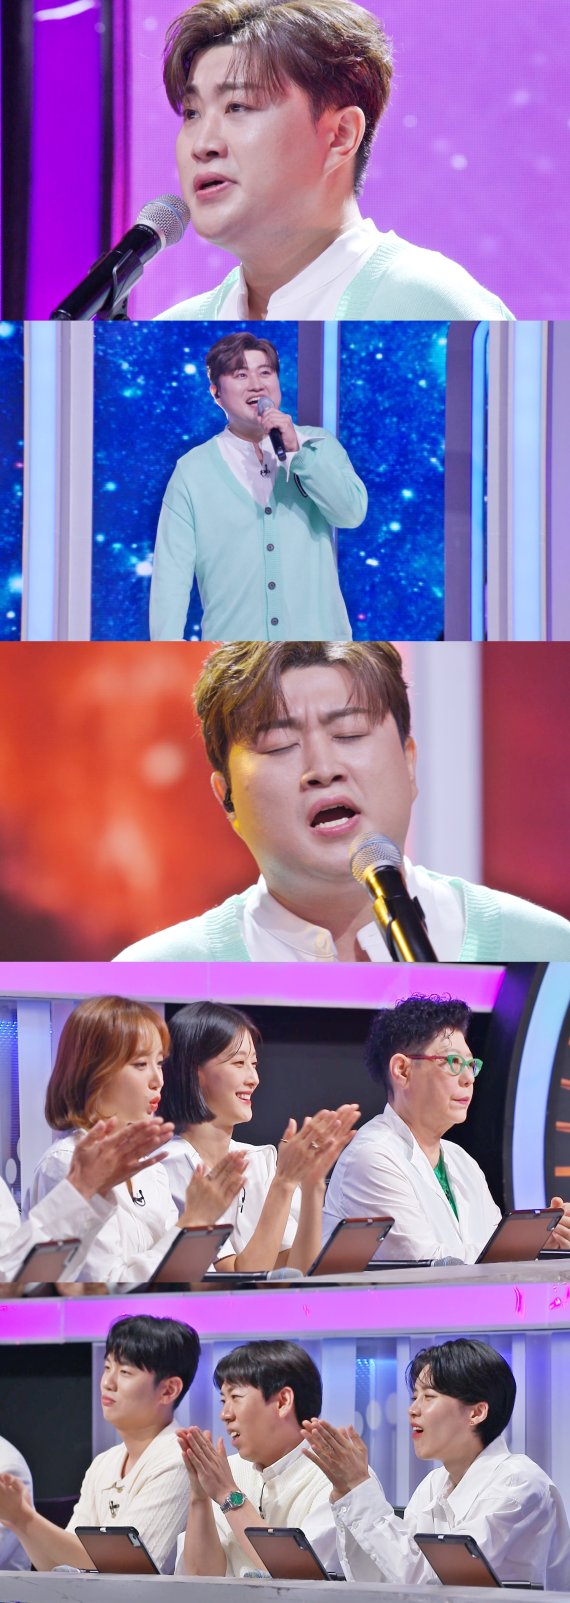 Kim Ho-joong, a singer who recently called off, will unveil the new song stage for the first time on the SBS mystery music show DNA Singer - Fantastic Family (hereinafter referred to as DNA Singer), which will be broadcast today (28th).Kim Ho-joong will appear on SBS entertainment after a long time since collecting topics from SBS Amazing Competition! Stocking to Godding Pavarotti.Kim Ho-joong revealed a behind-the-scenes story that he asked to see as a DNA singer listener in a recent recording.The stage of the new song The Lighting Person, which tells the story of a fan who cheered him up during his military service, will be released for the first time on the air.Kim Ho-joong also said, There was a stage where I saw a big DNA singer at the time of military service.I want to sing it on this stage with that heart. In addition to the new song, I foresaw another special stage.On the other hand, Kim Ho-joongs new song stage can be found in DNA Singer which is broadcasted at 9 oclock tonight.